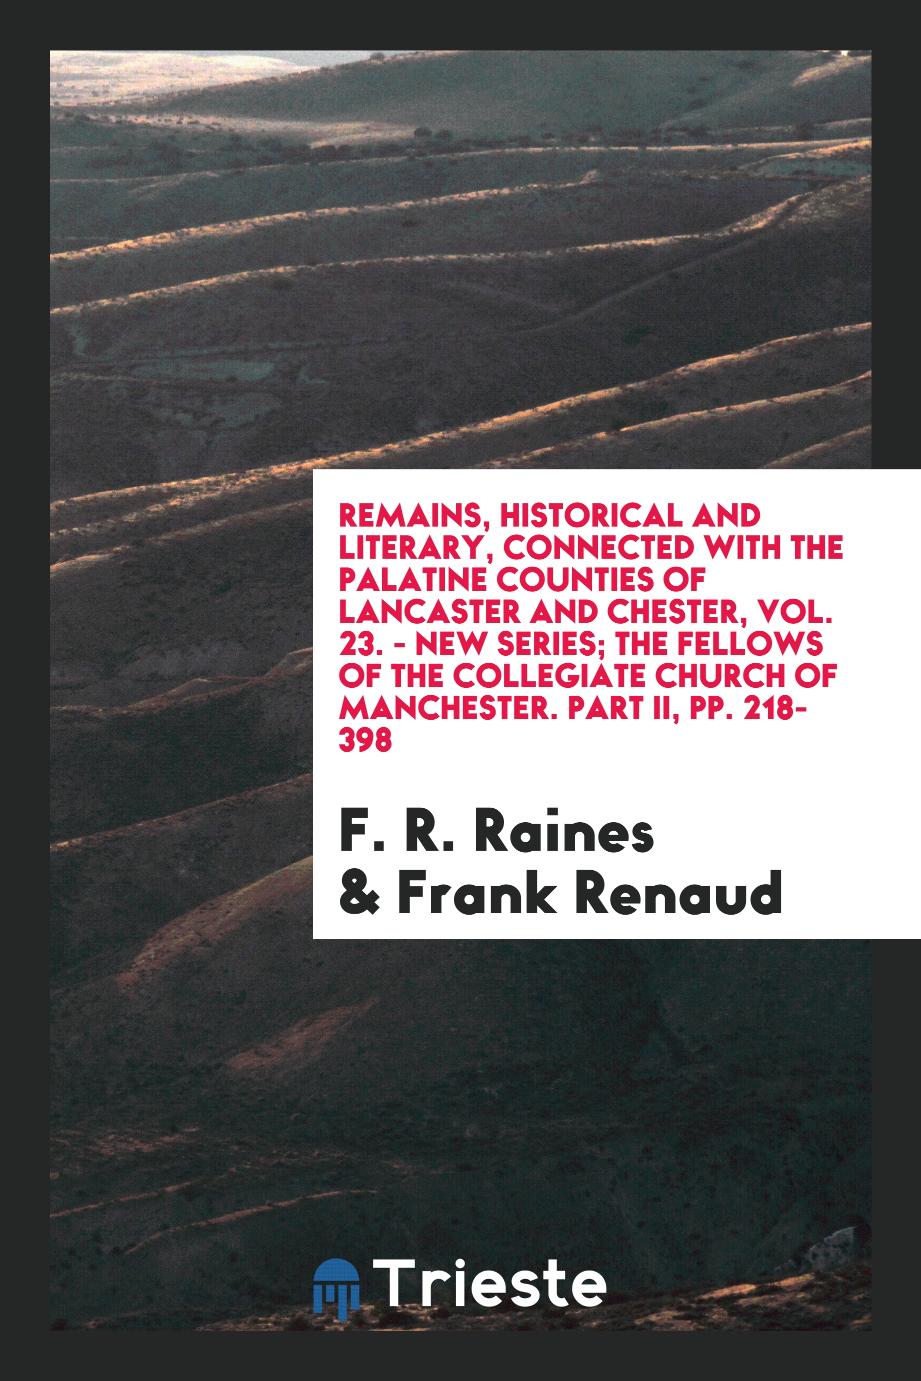 Remains, Historical and Literary, Connected with the Palatine Counties of Lancaster and Chester, Vol. 23. - New Series; The Fellows of the Collegiate Church of Manchester. Part II, pp. 218-398